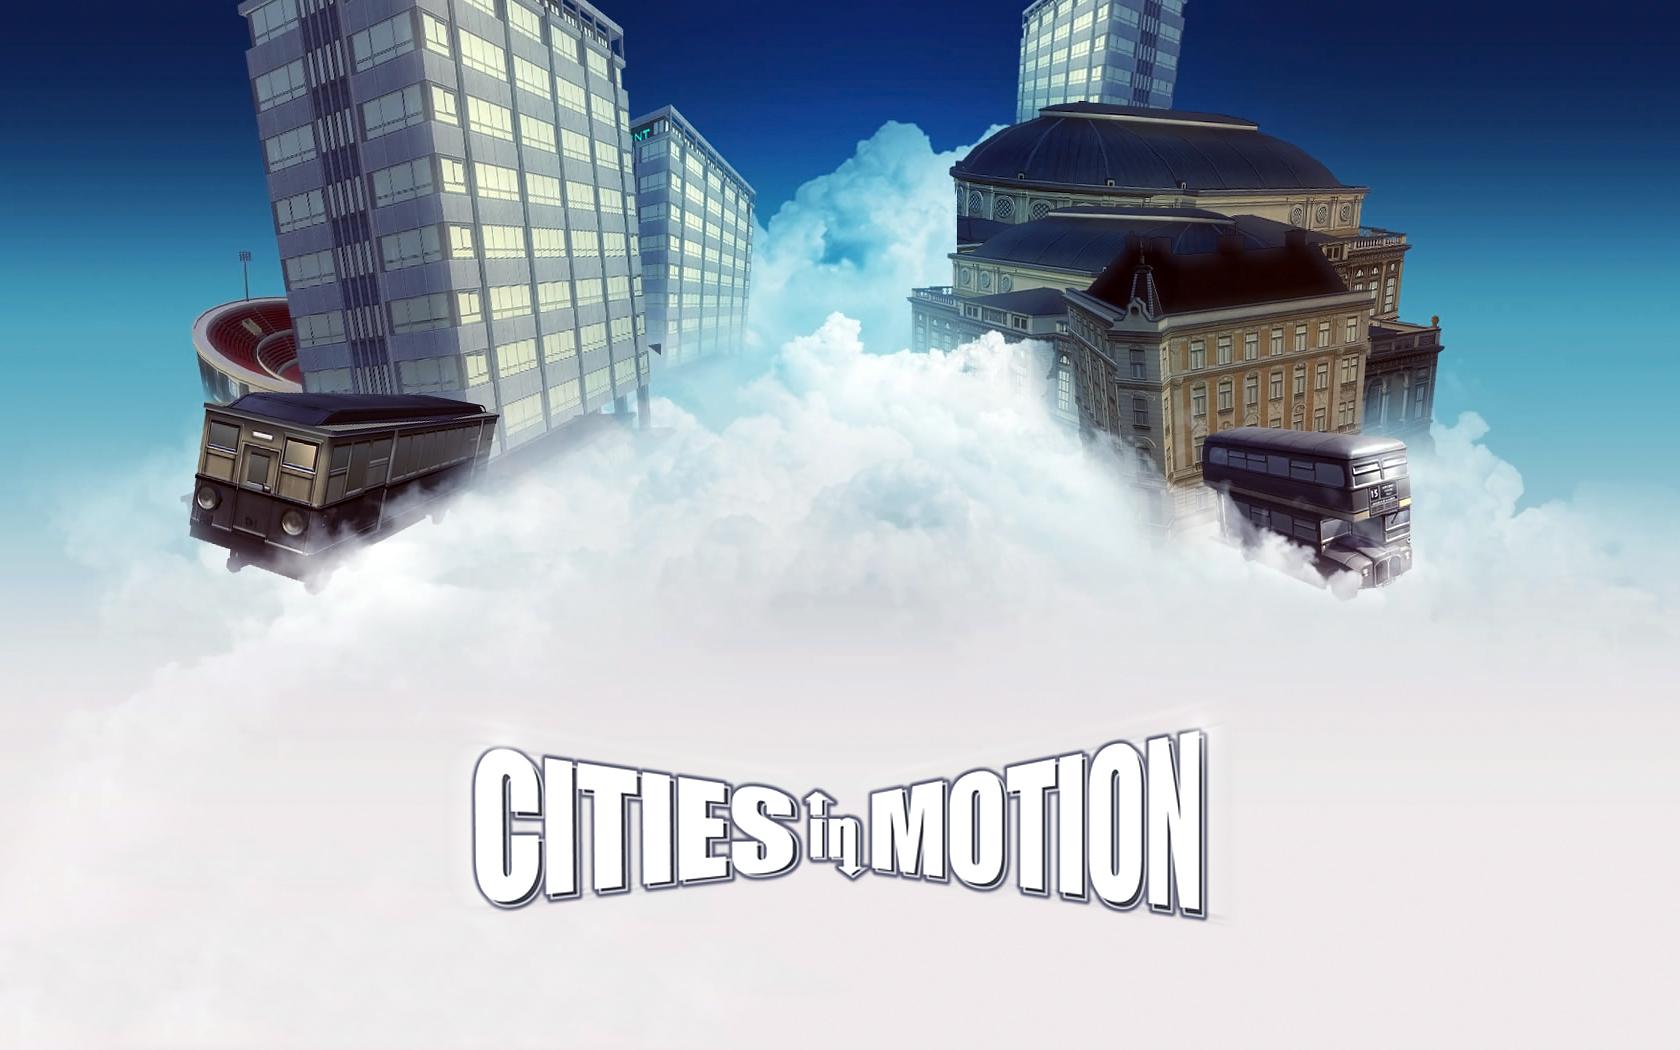 Cities In Motion